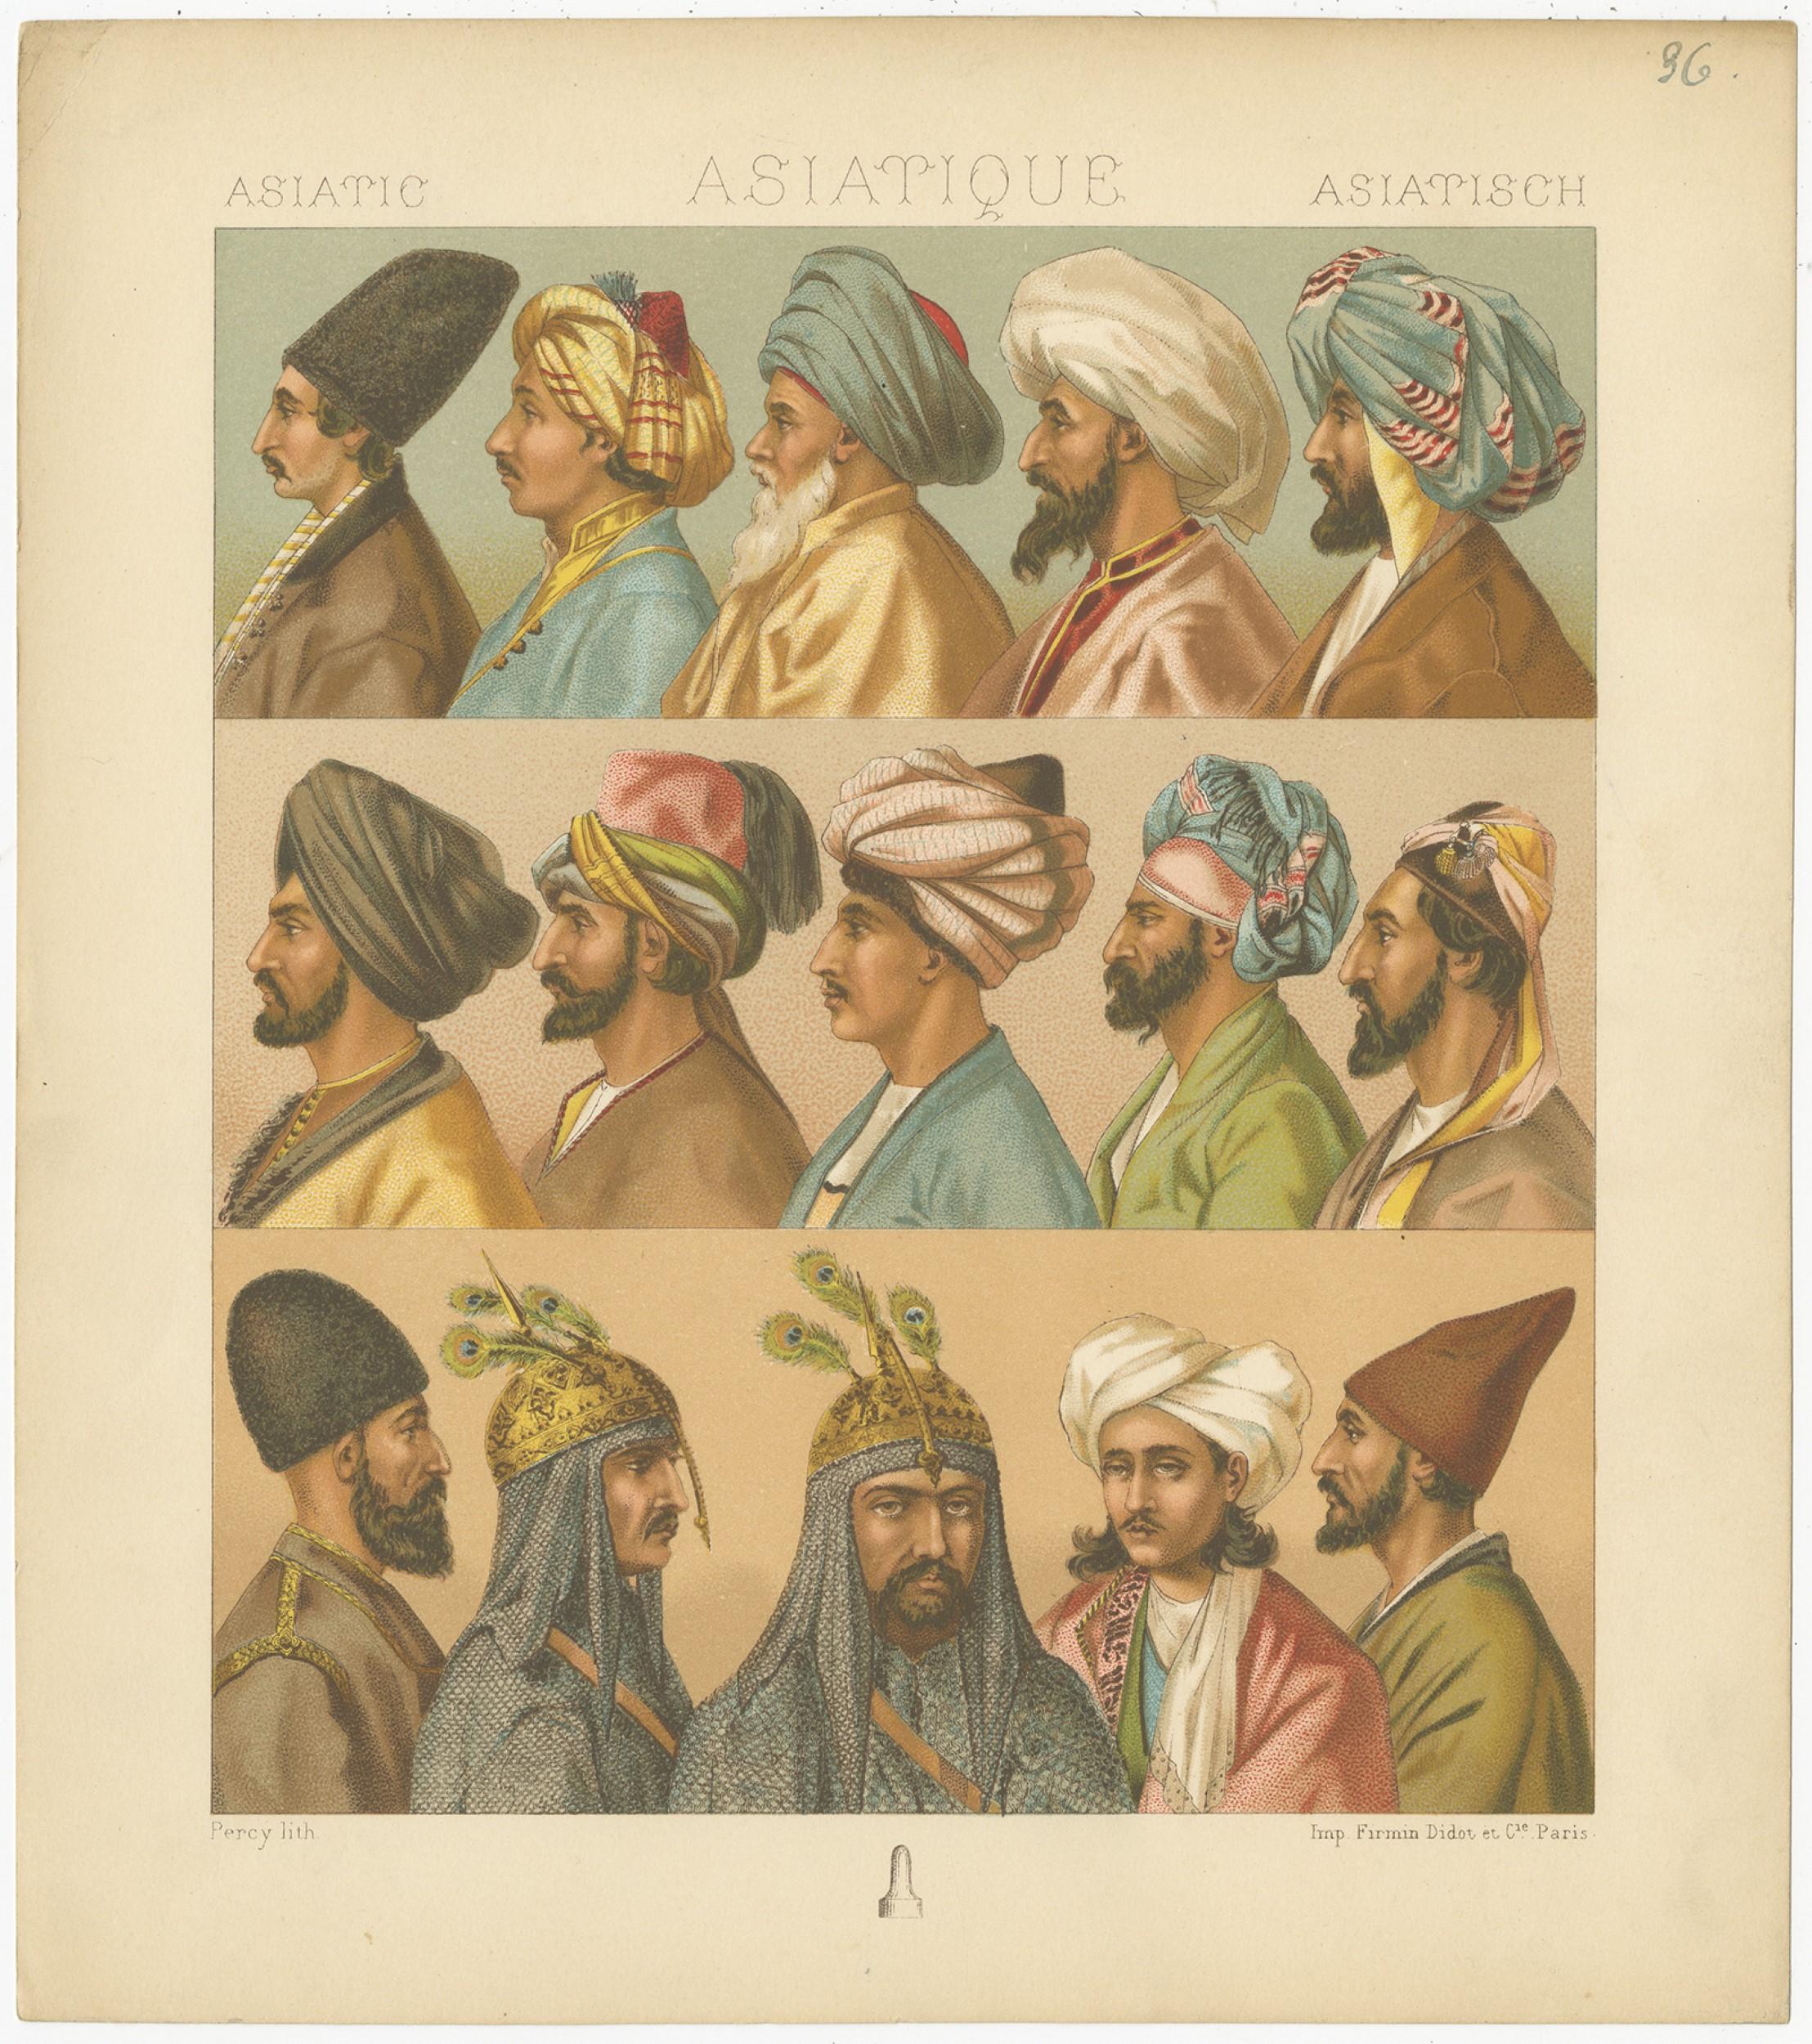 Antique print titled 'Asiatic - Asiatique - Asiatisch'. Chromolithograph of Asiatic Headwear. This print originates from 'Le Costume Historique' by M.A. Racinet. Published, circa 1880.